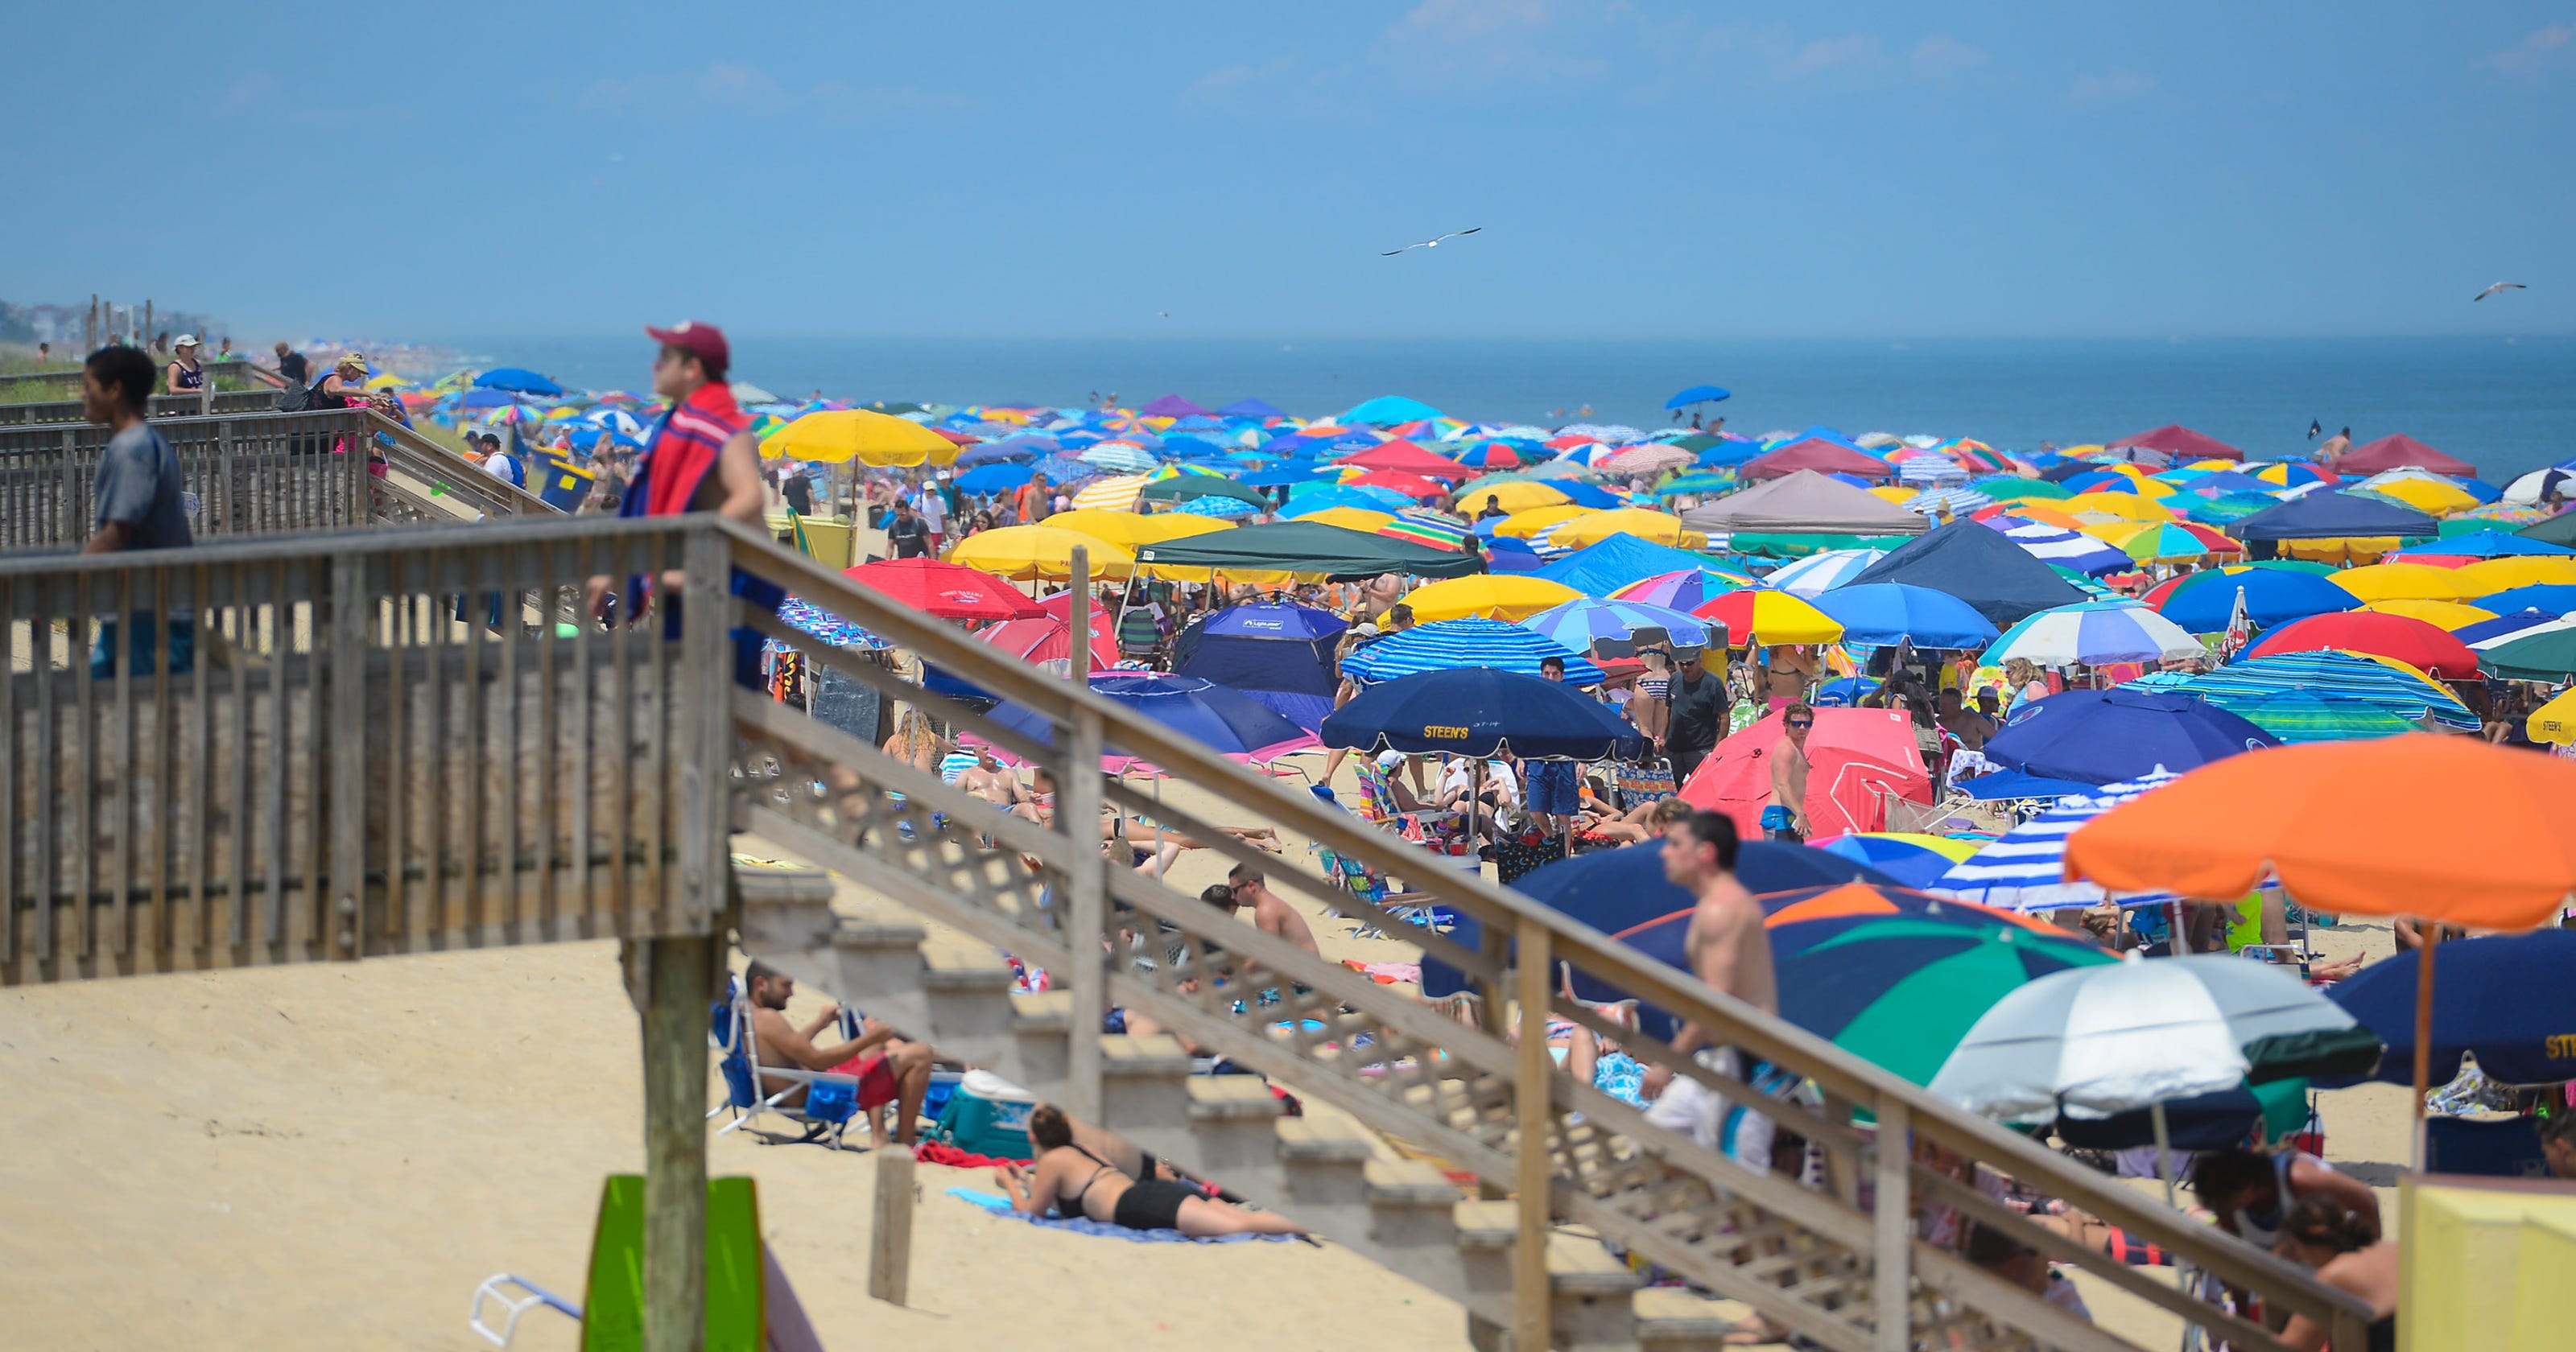 Bethany Beach on track to ban tents and canopies